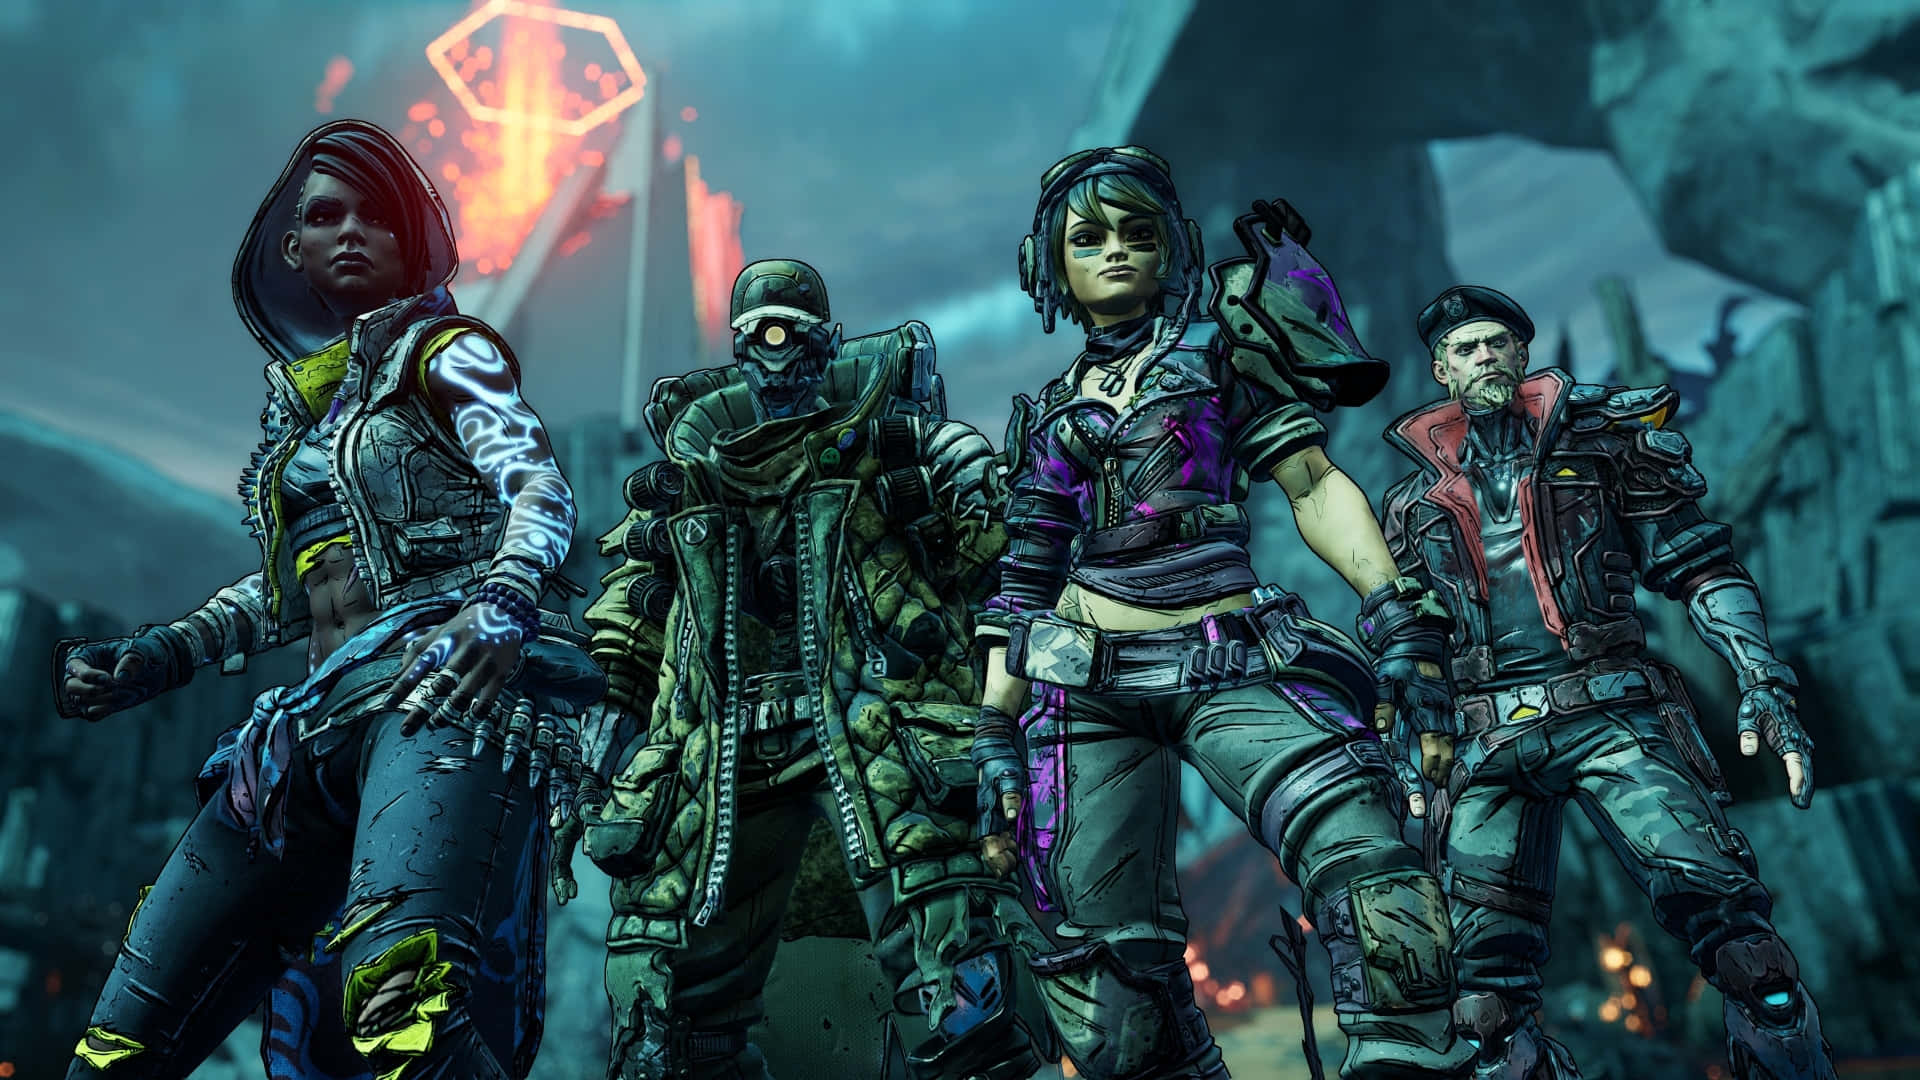 Fight your way through the unforgiving wastelands of Borderlands 3